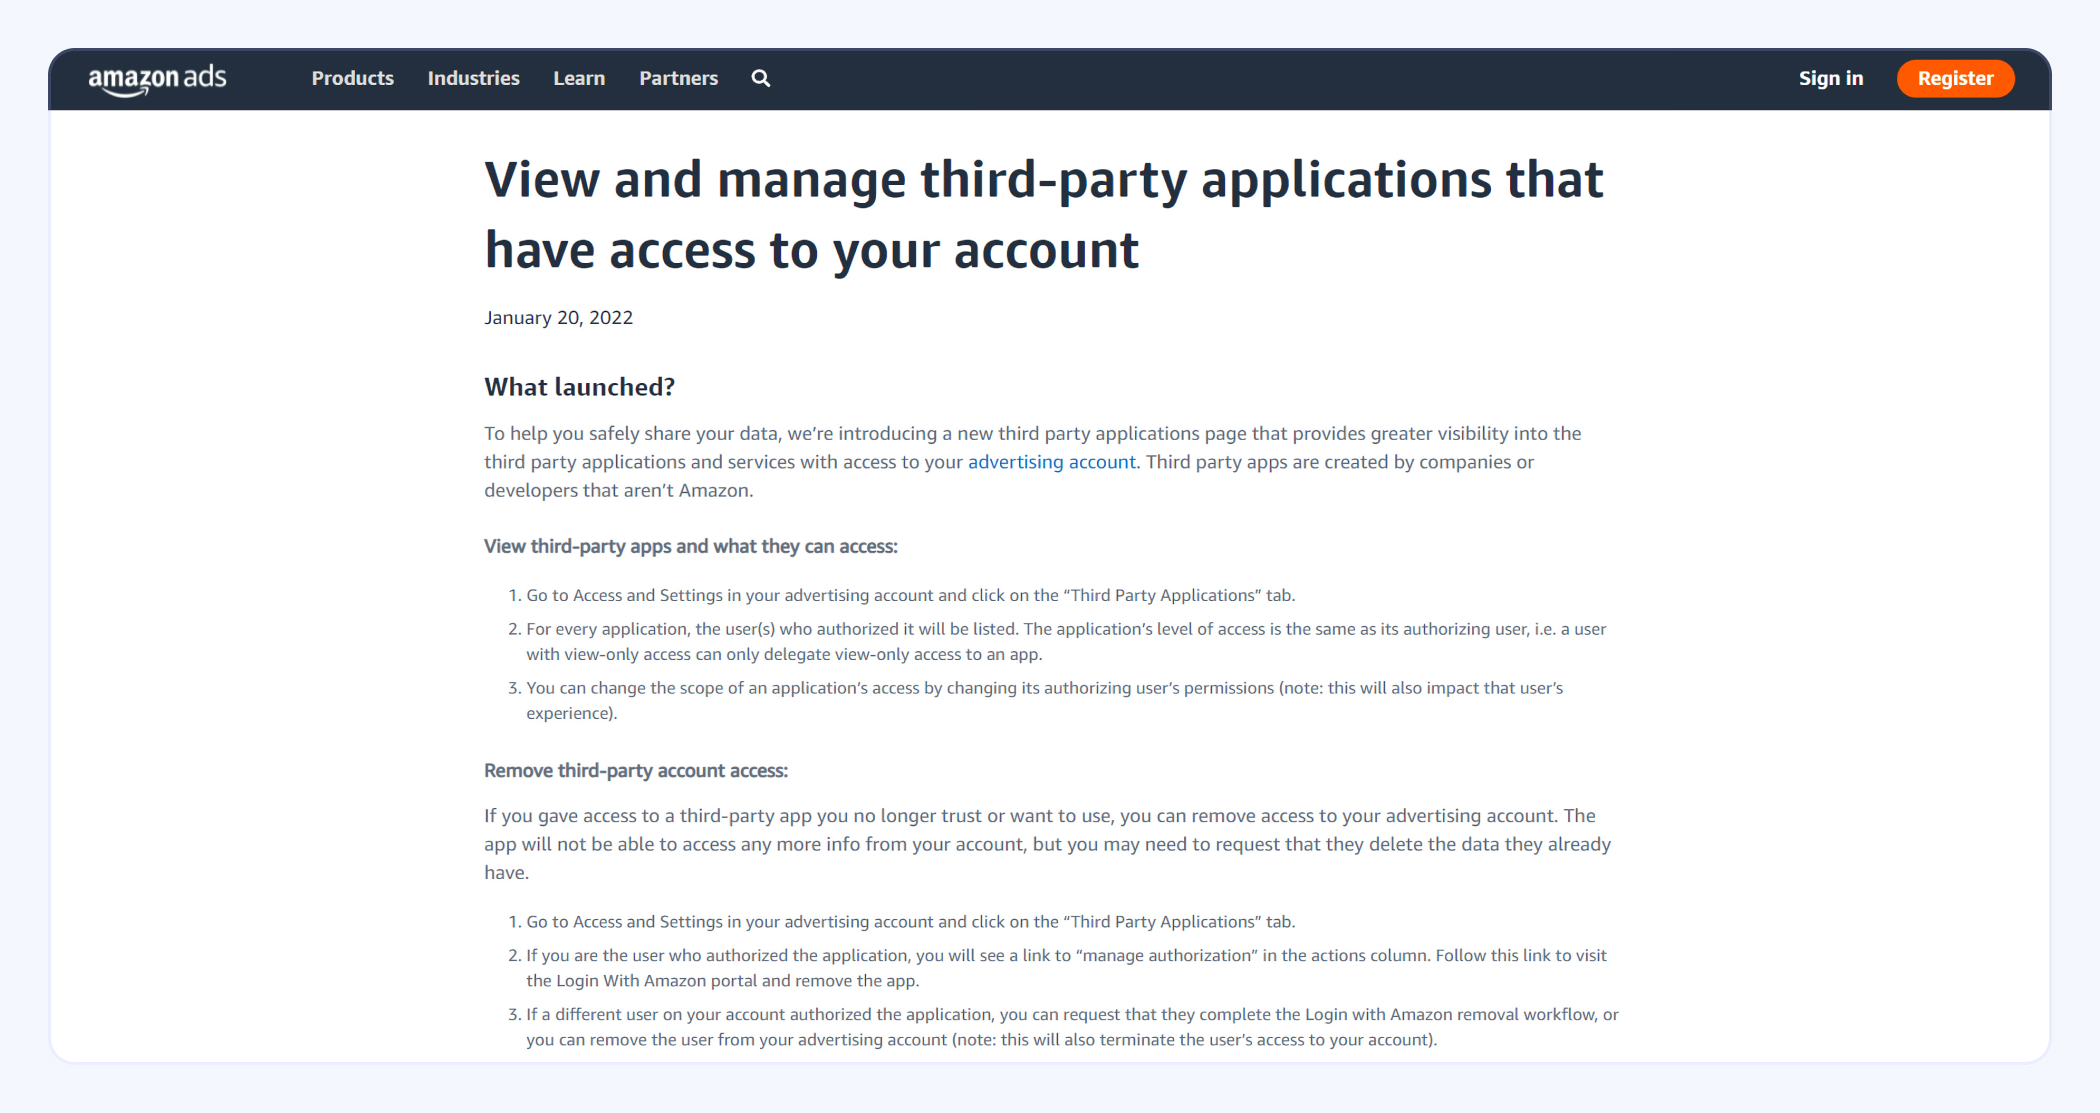 Third-party Apps with Access to Account